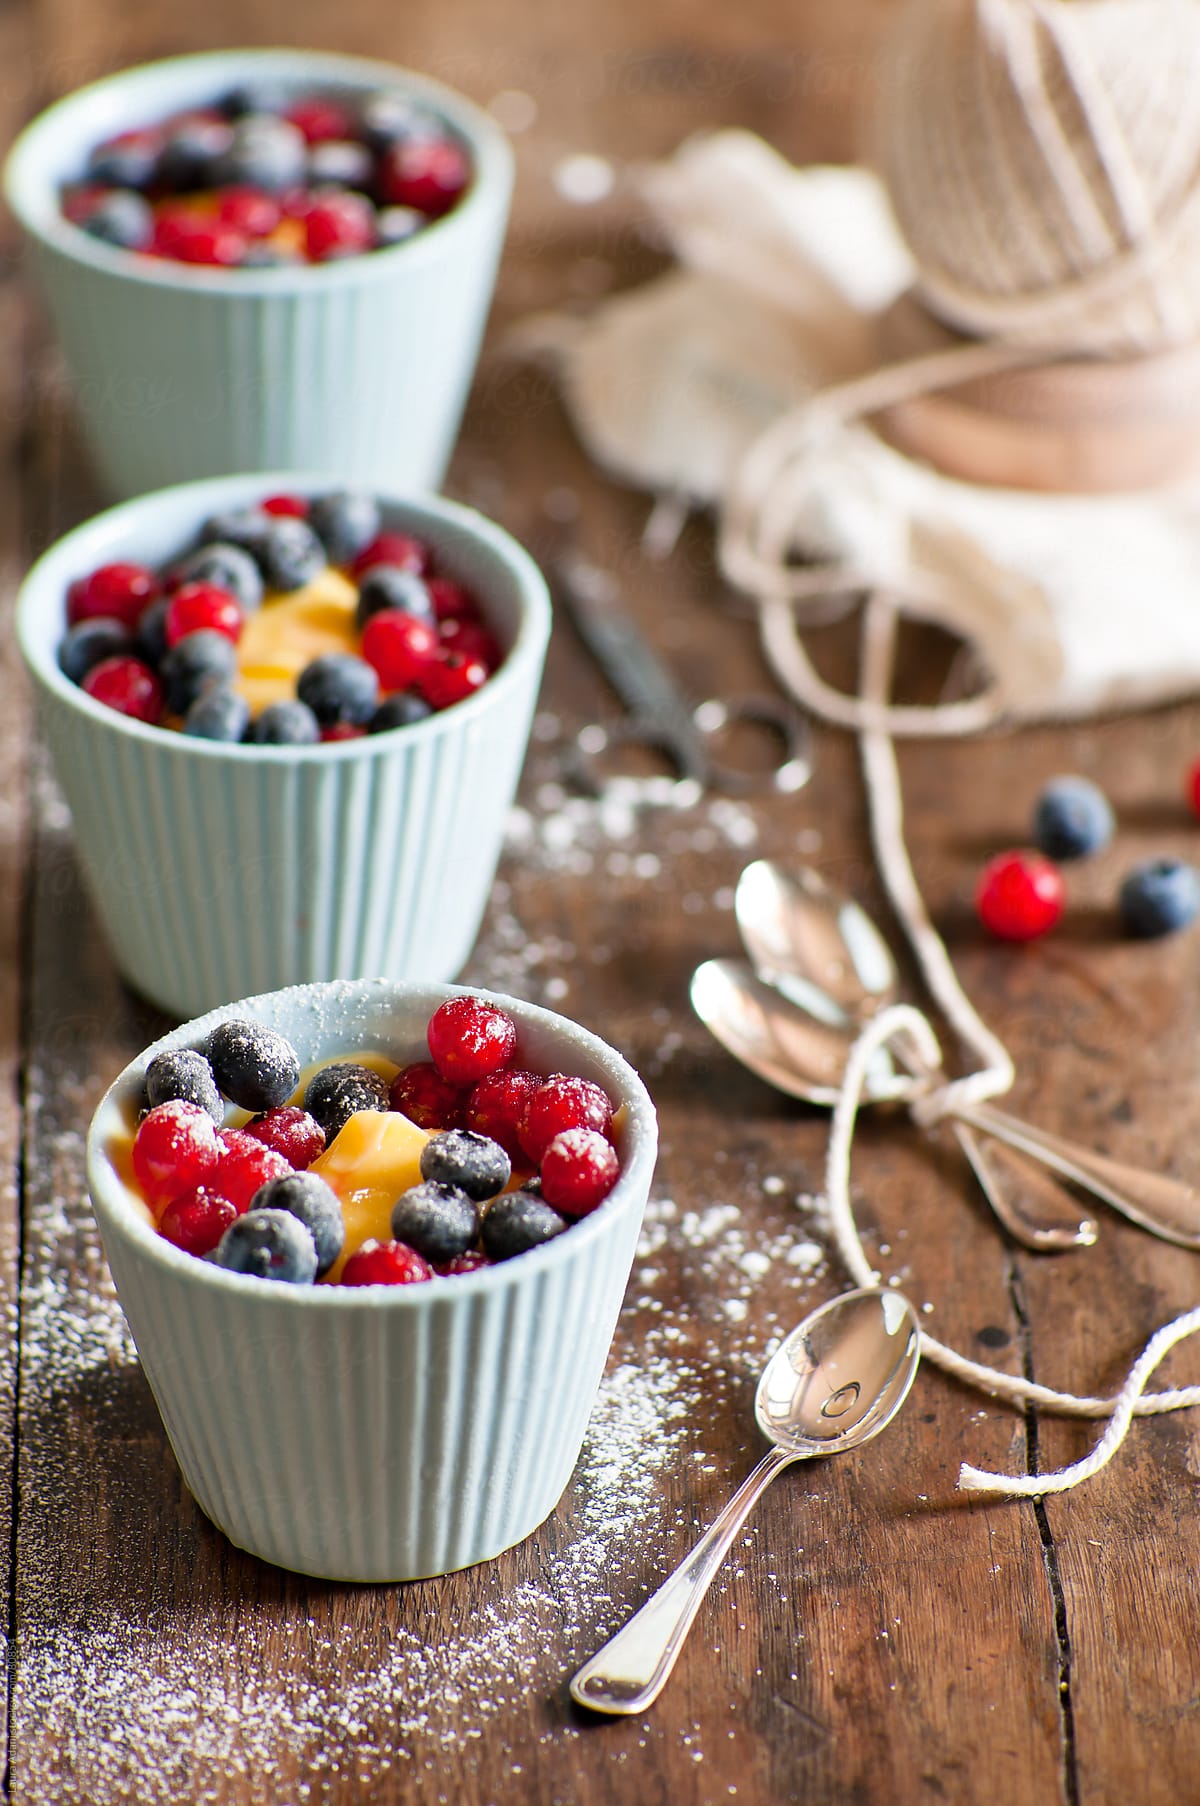 custard with currants and blueberries